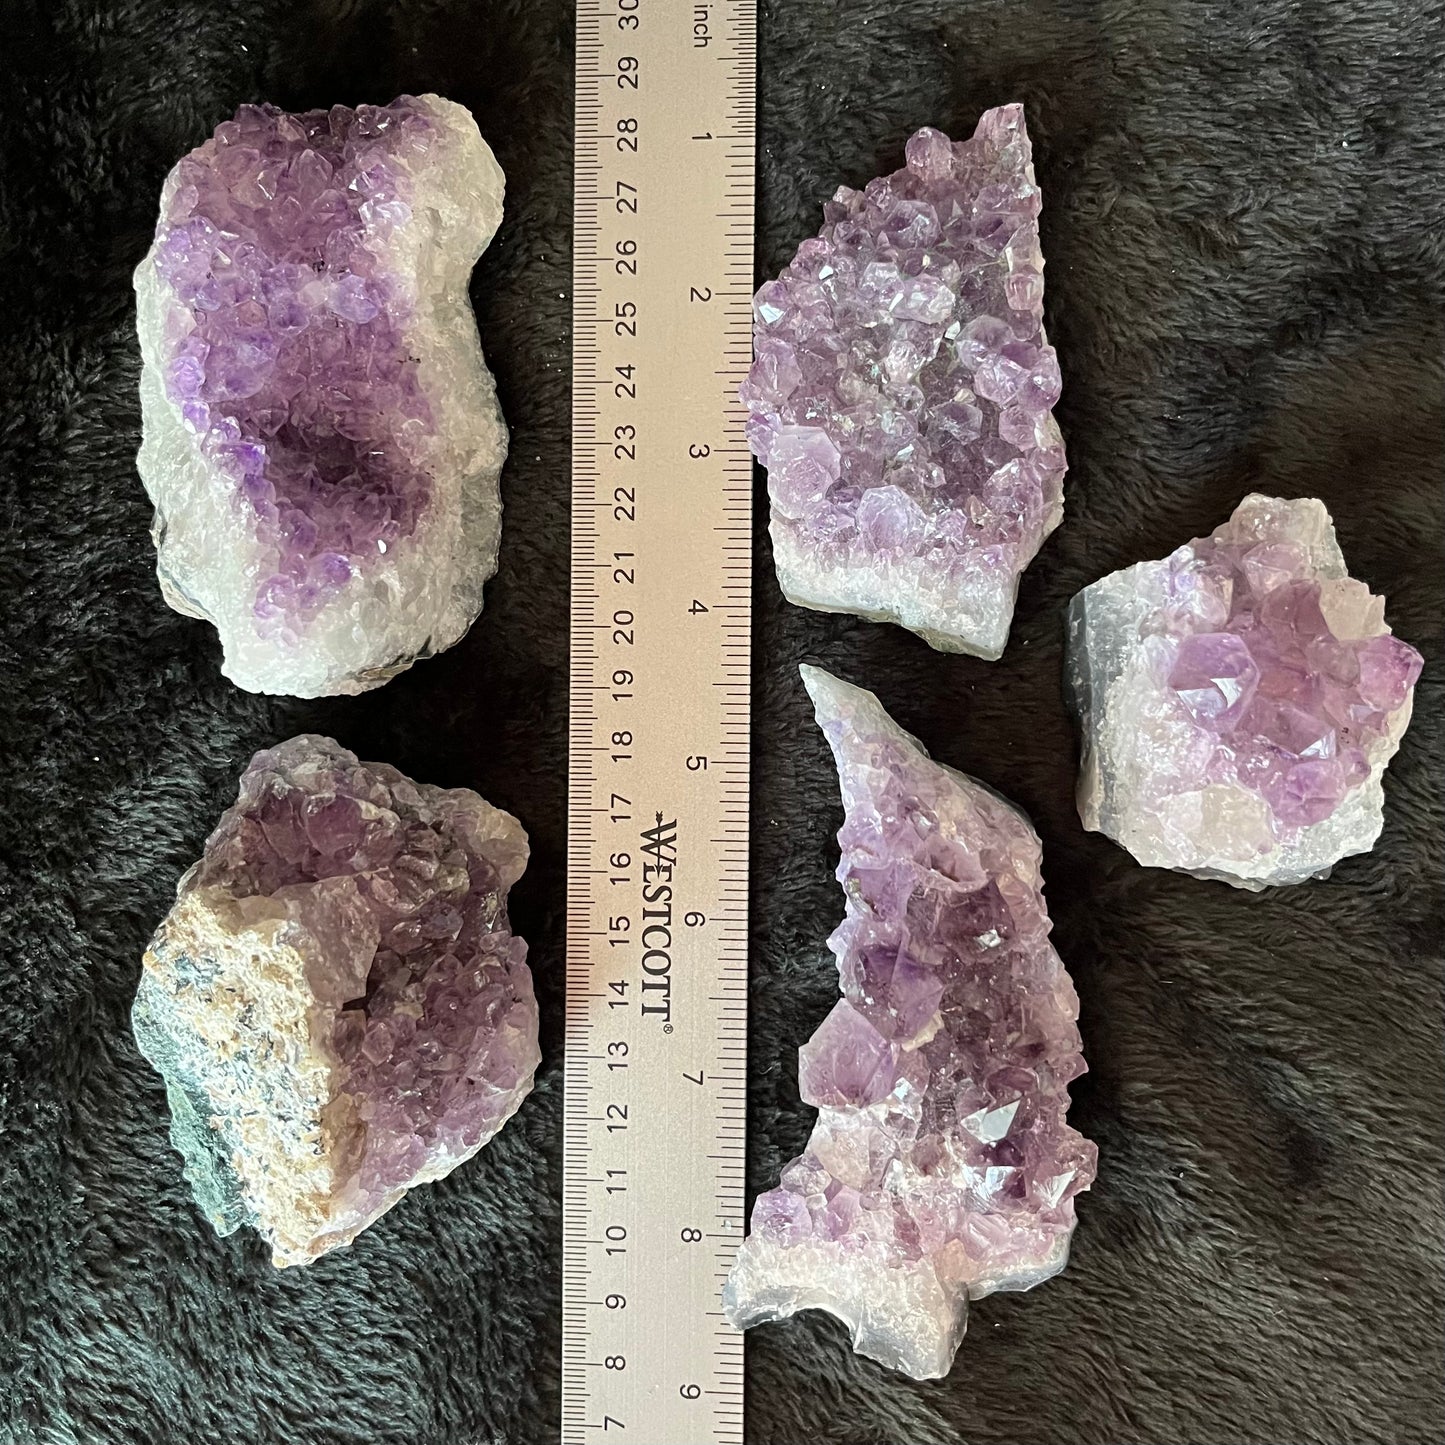 Amethyst Crystal Cluster, 1 pound lot, WC-0022